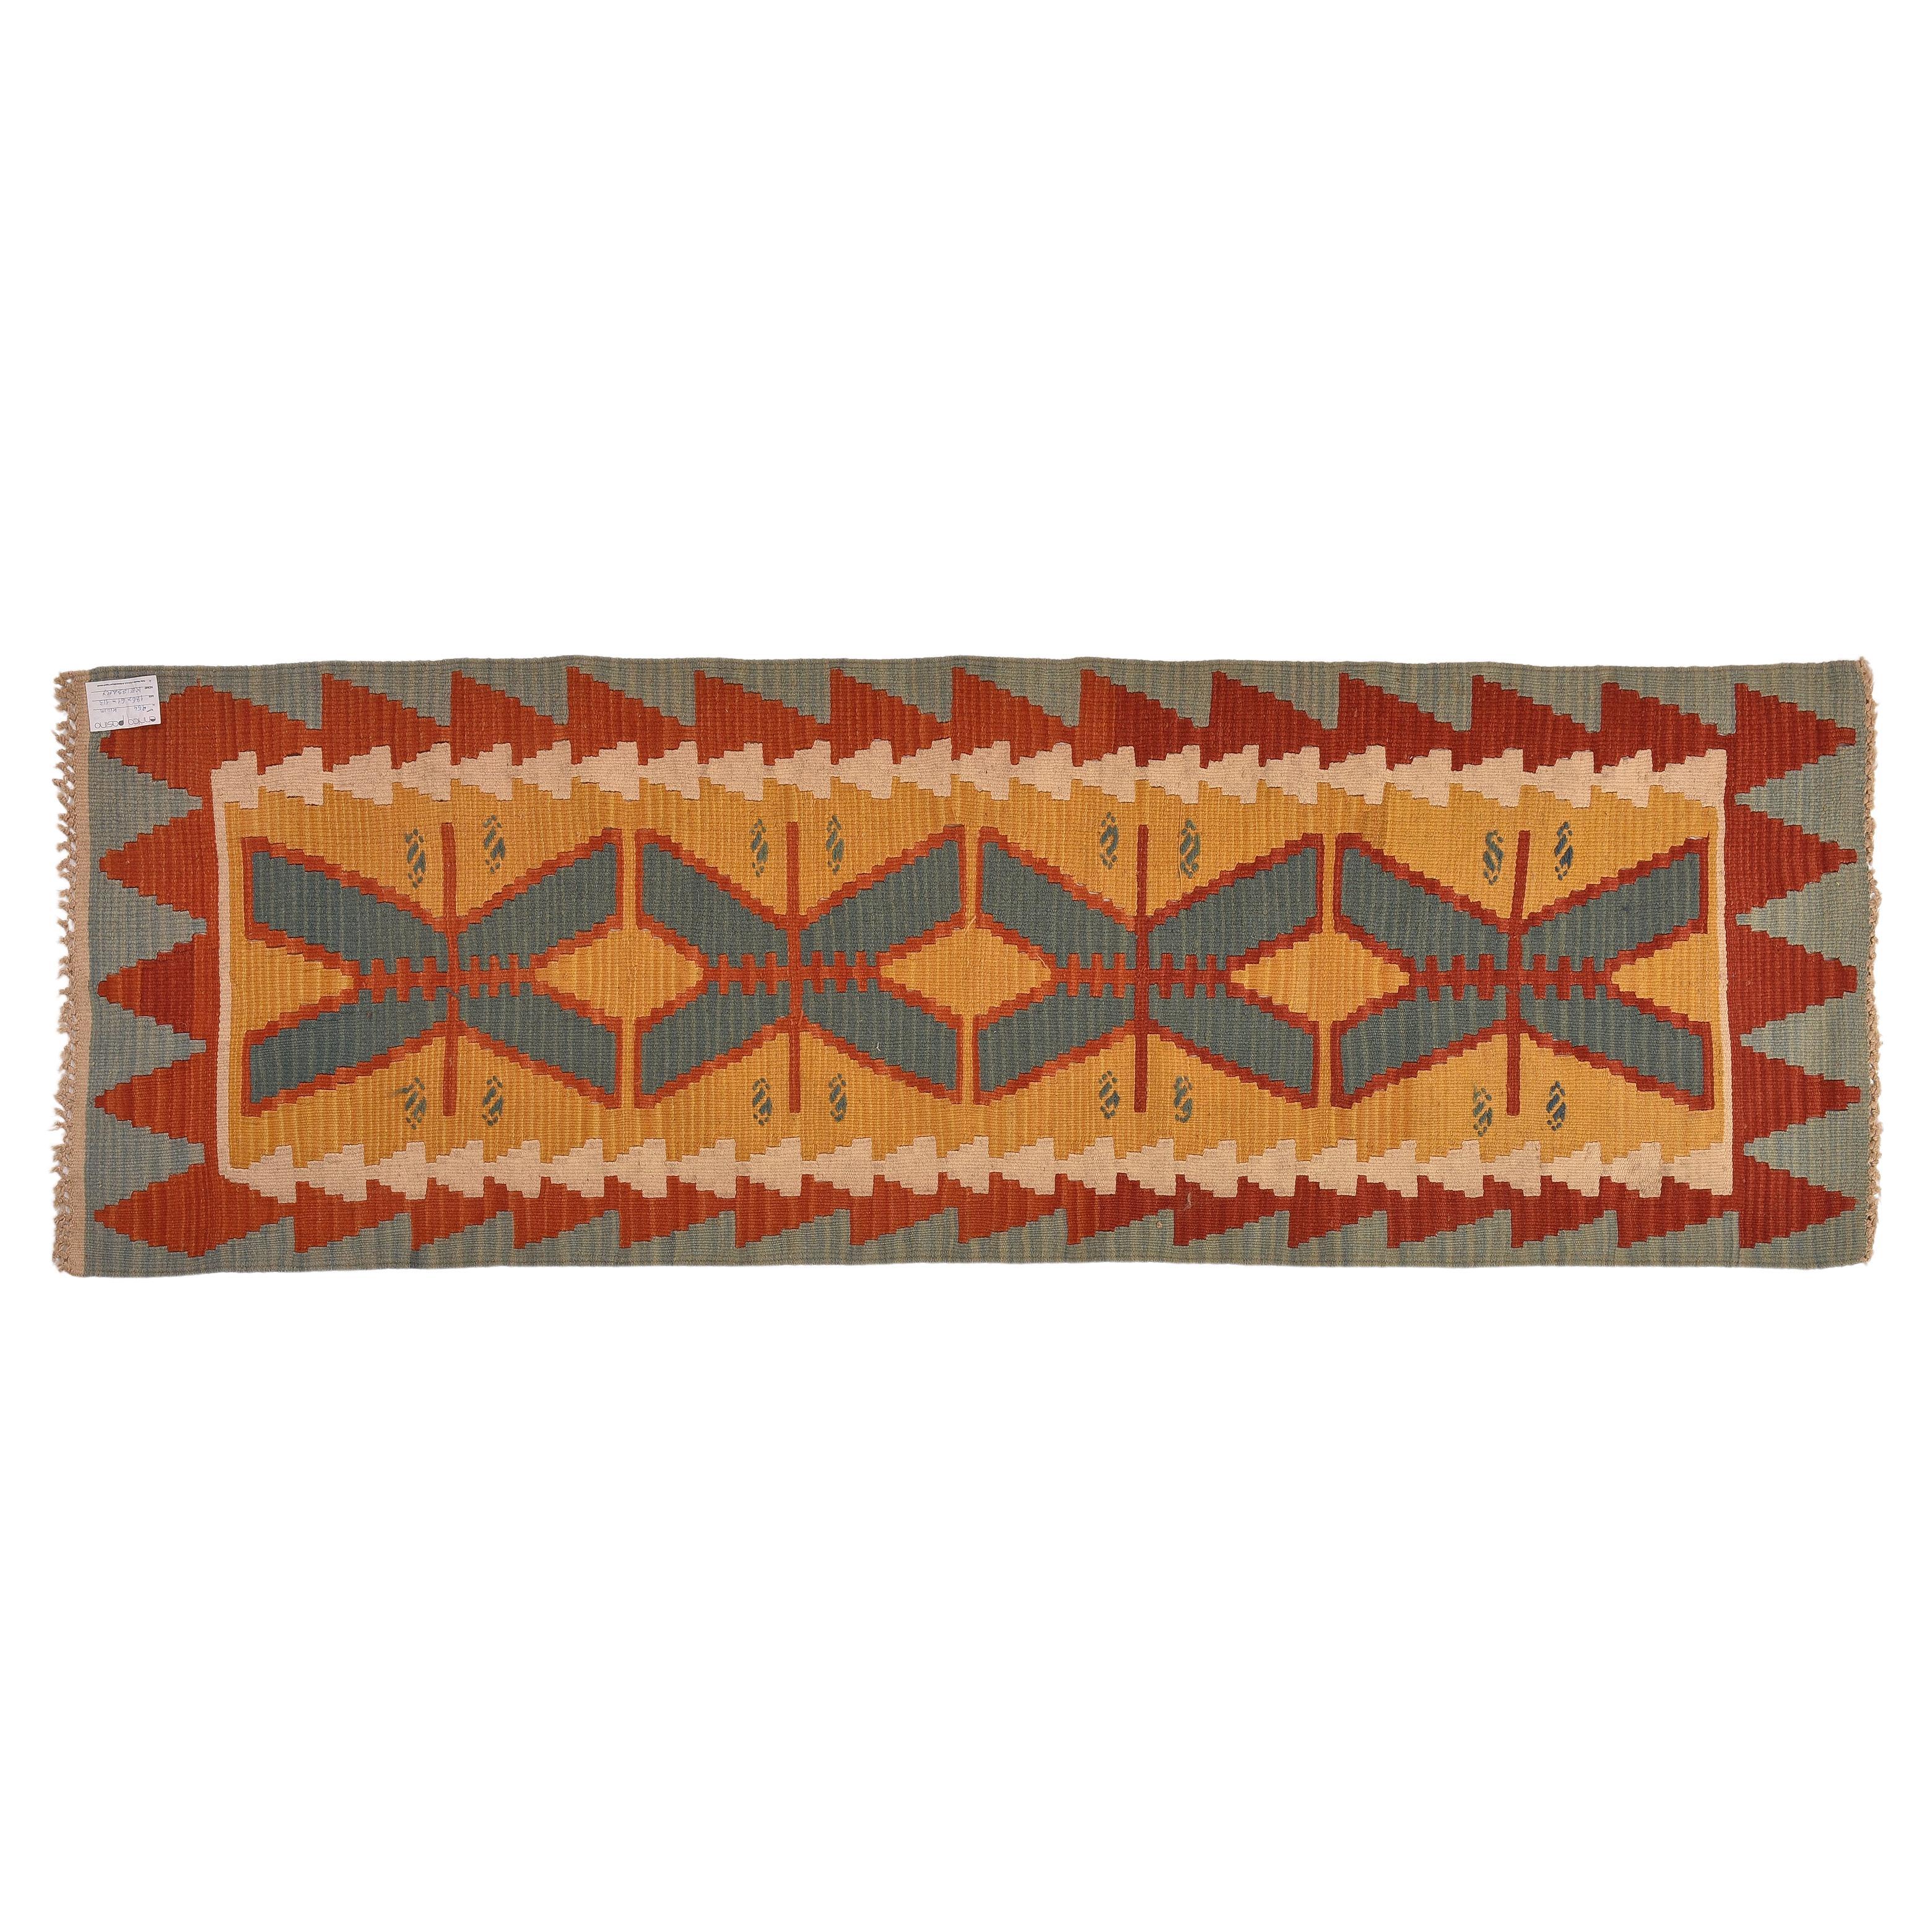 Pleasant kilim runner from the famous Keissary: best quality, beautiful colors, suitable for anywhere.
Good price, also.